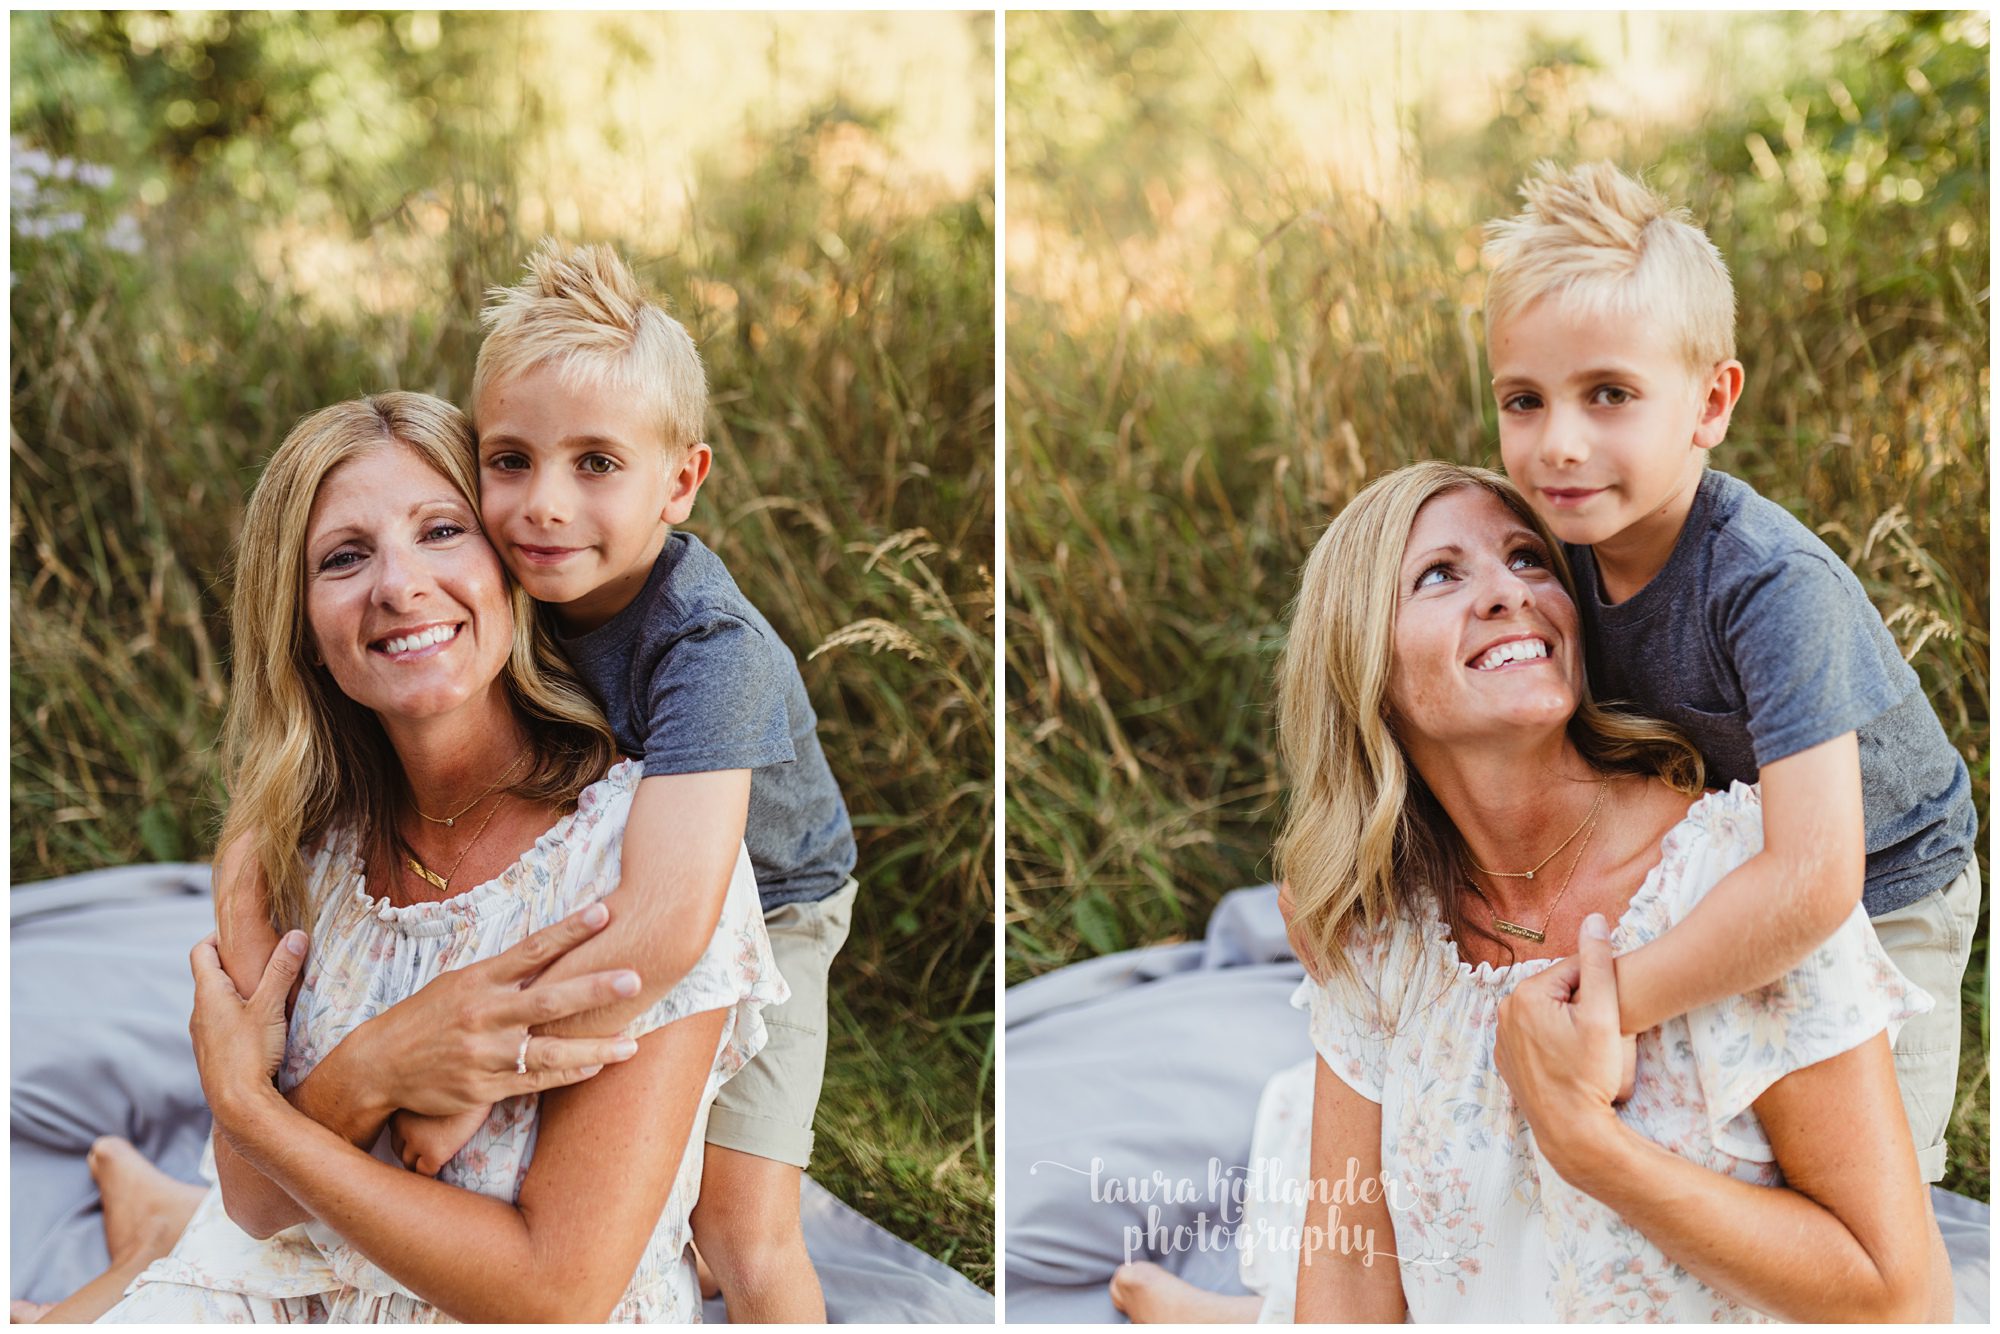 mommy and me session, Battle Creek MI, mother and son, Laura Hollander Photography